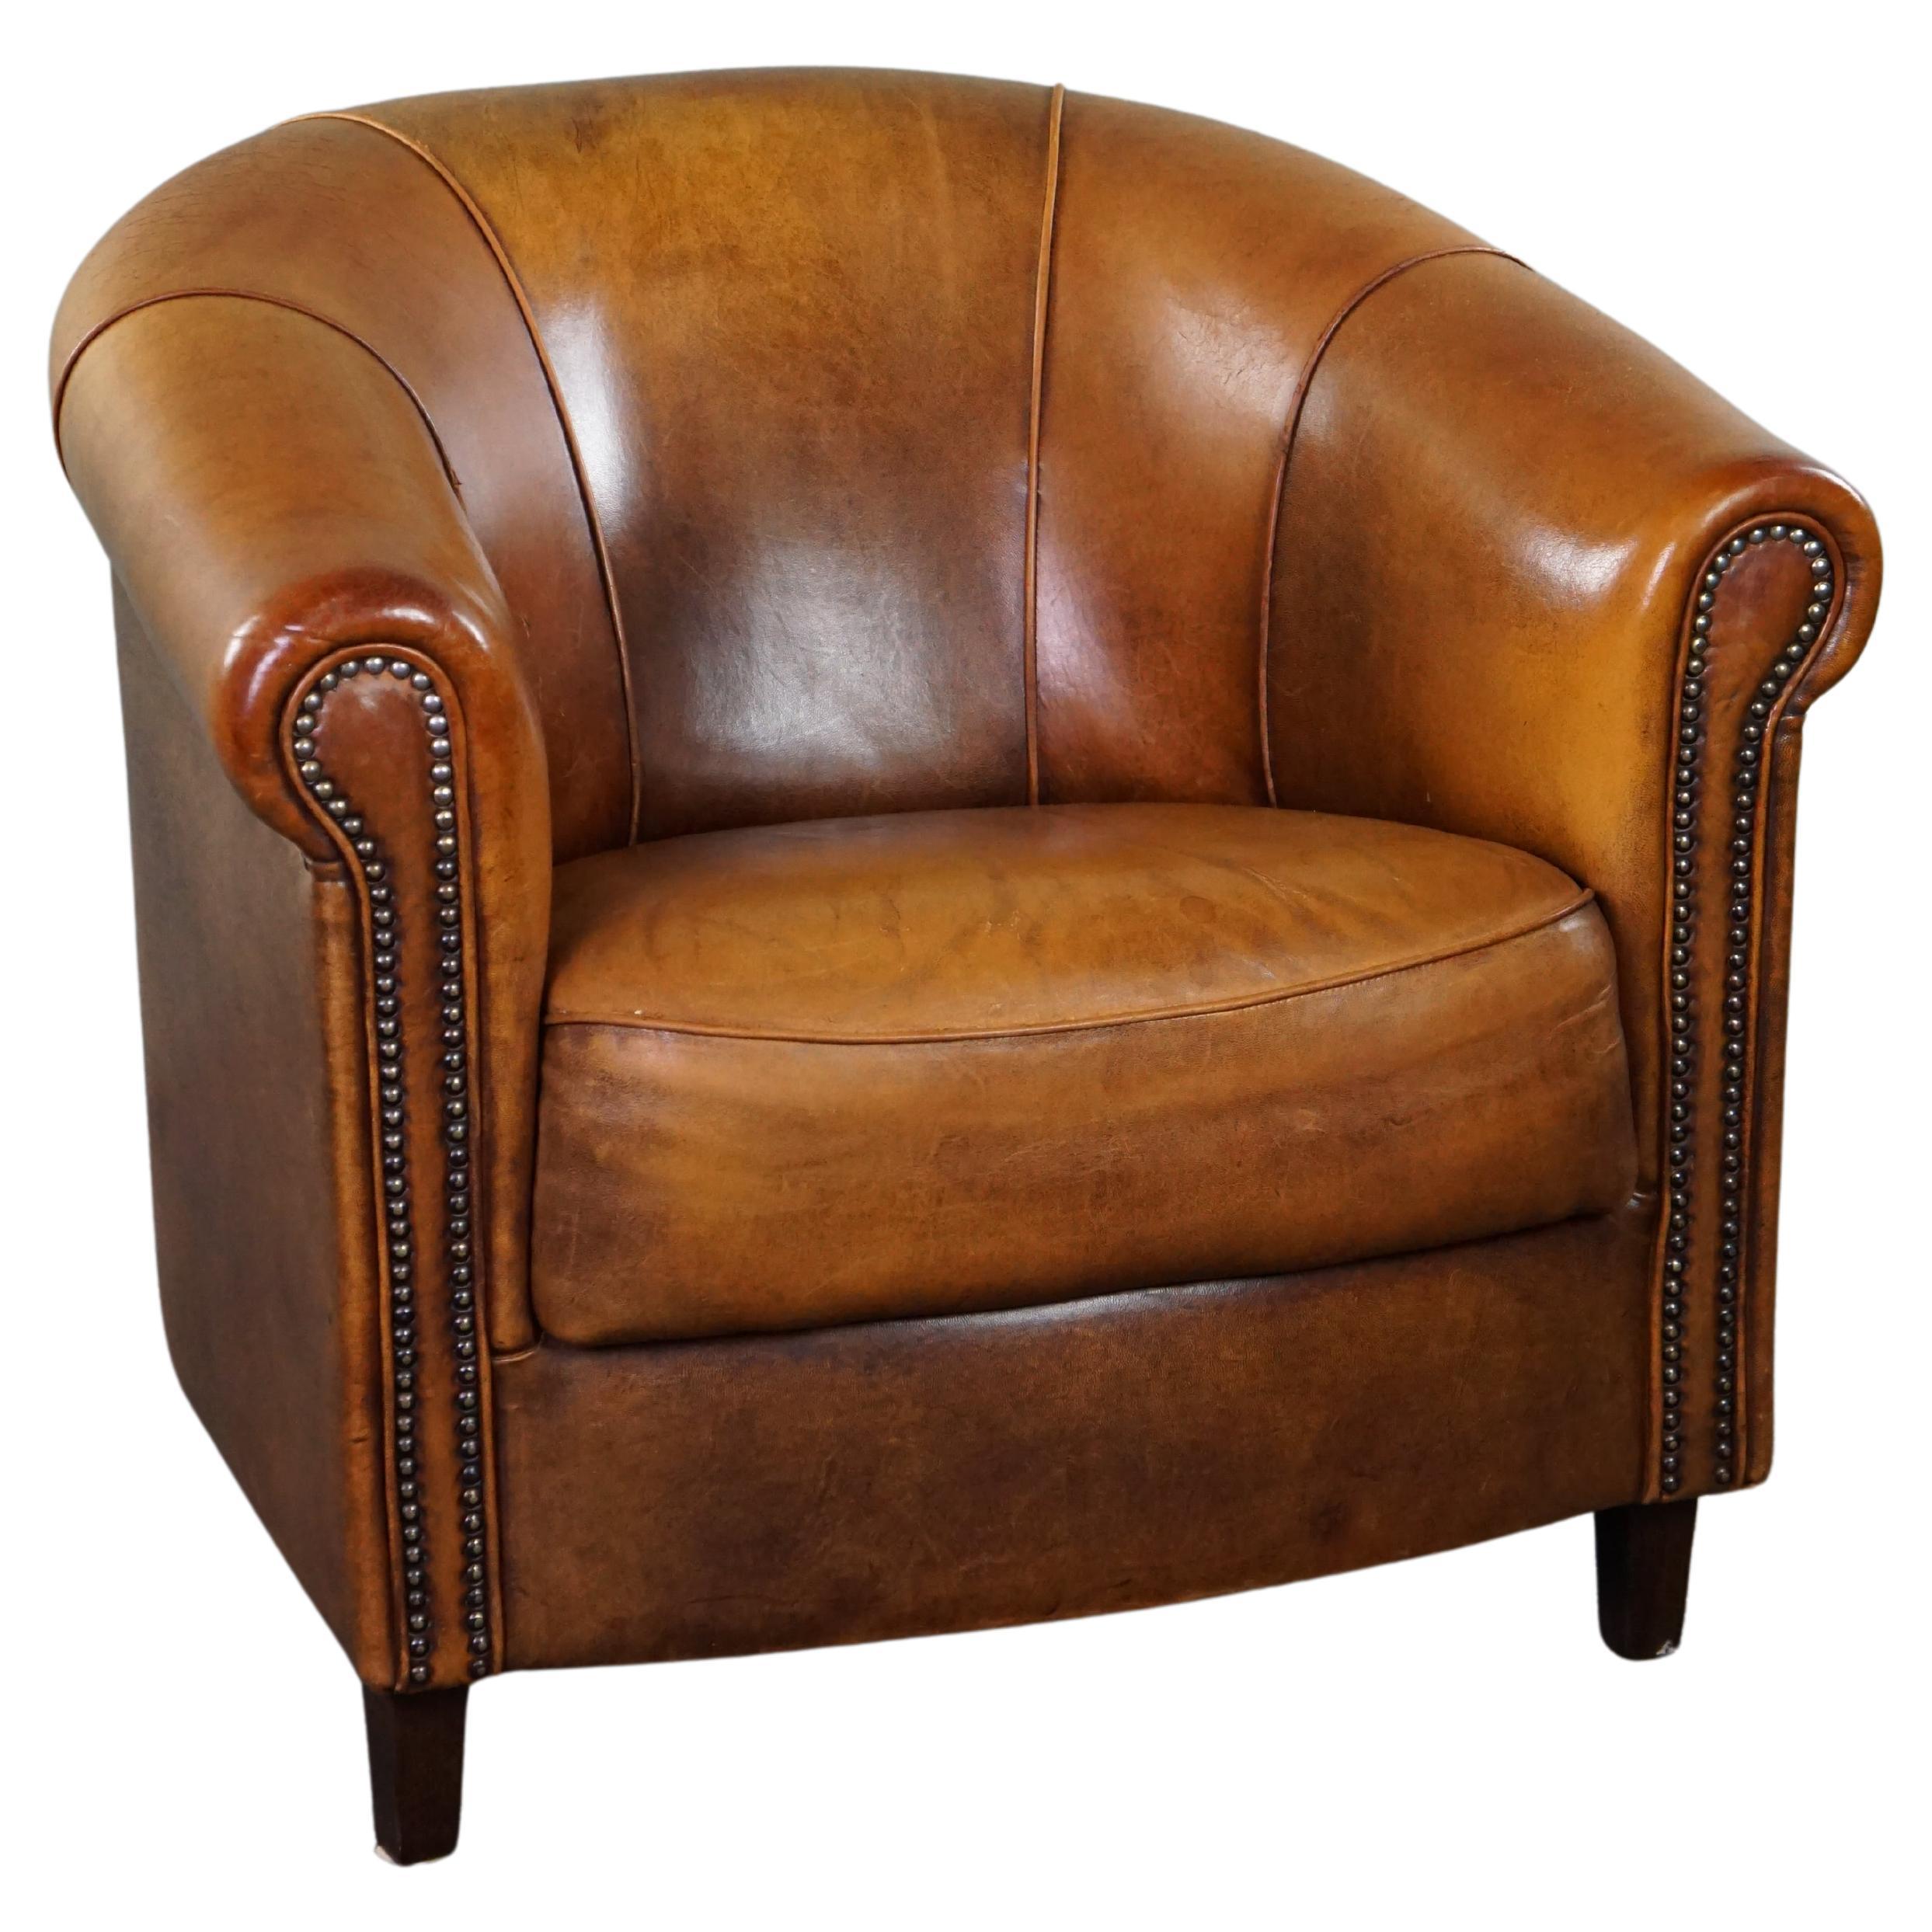 Sheepskin club armchair with a fixed seat cushion For Sale